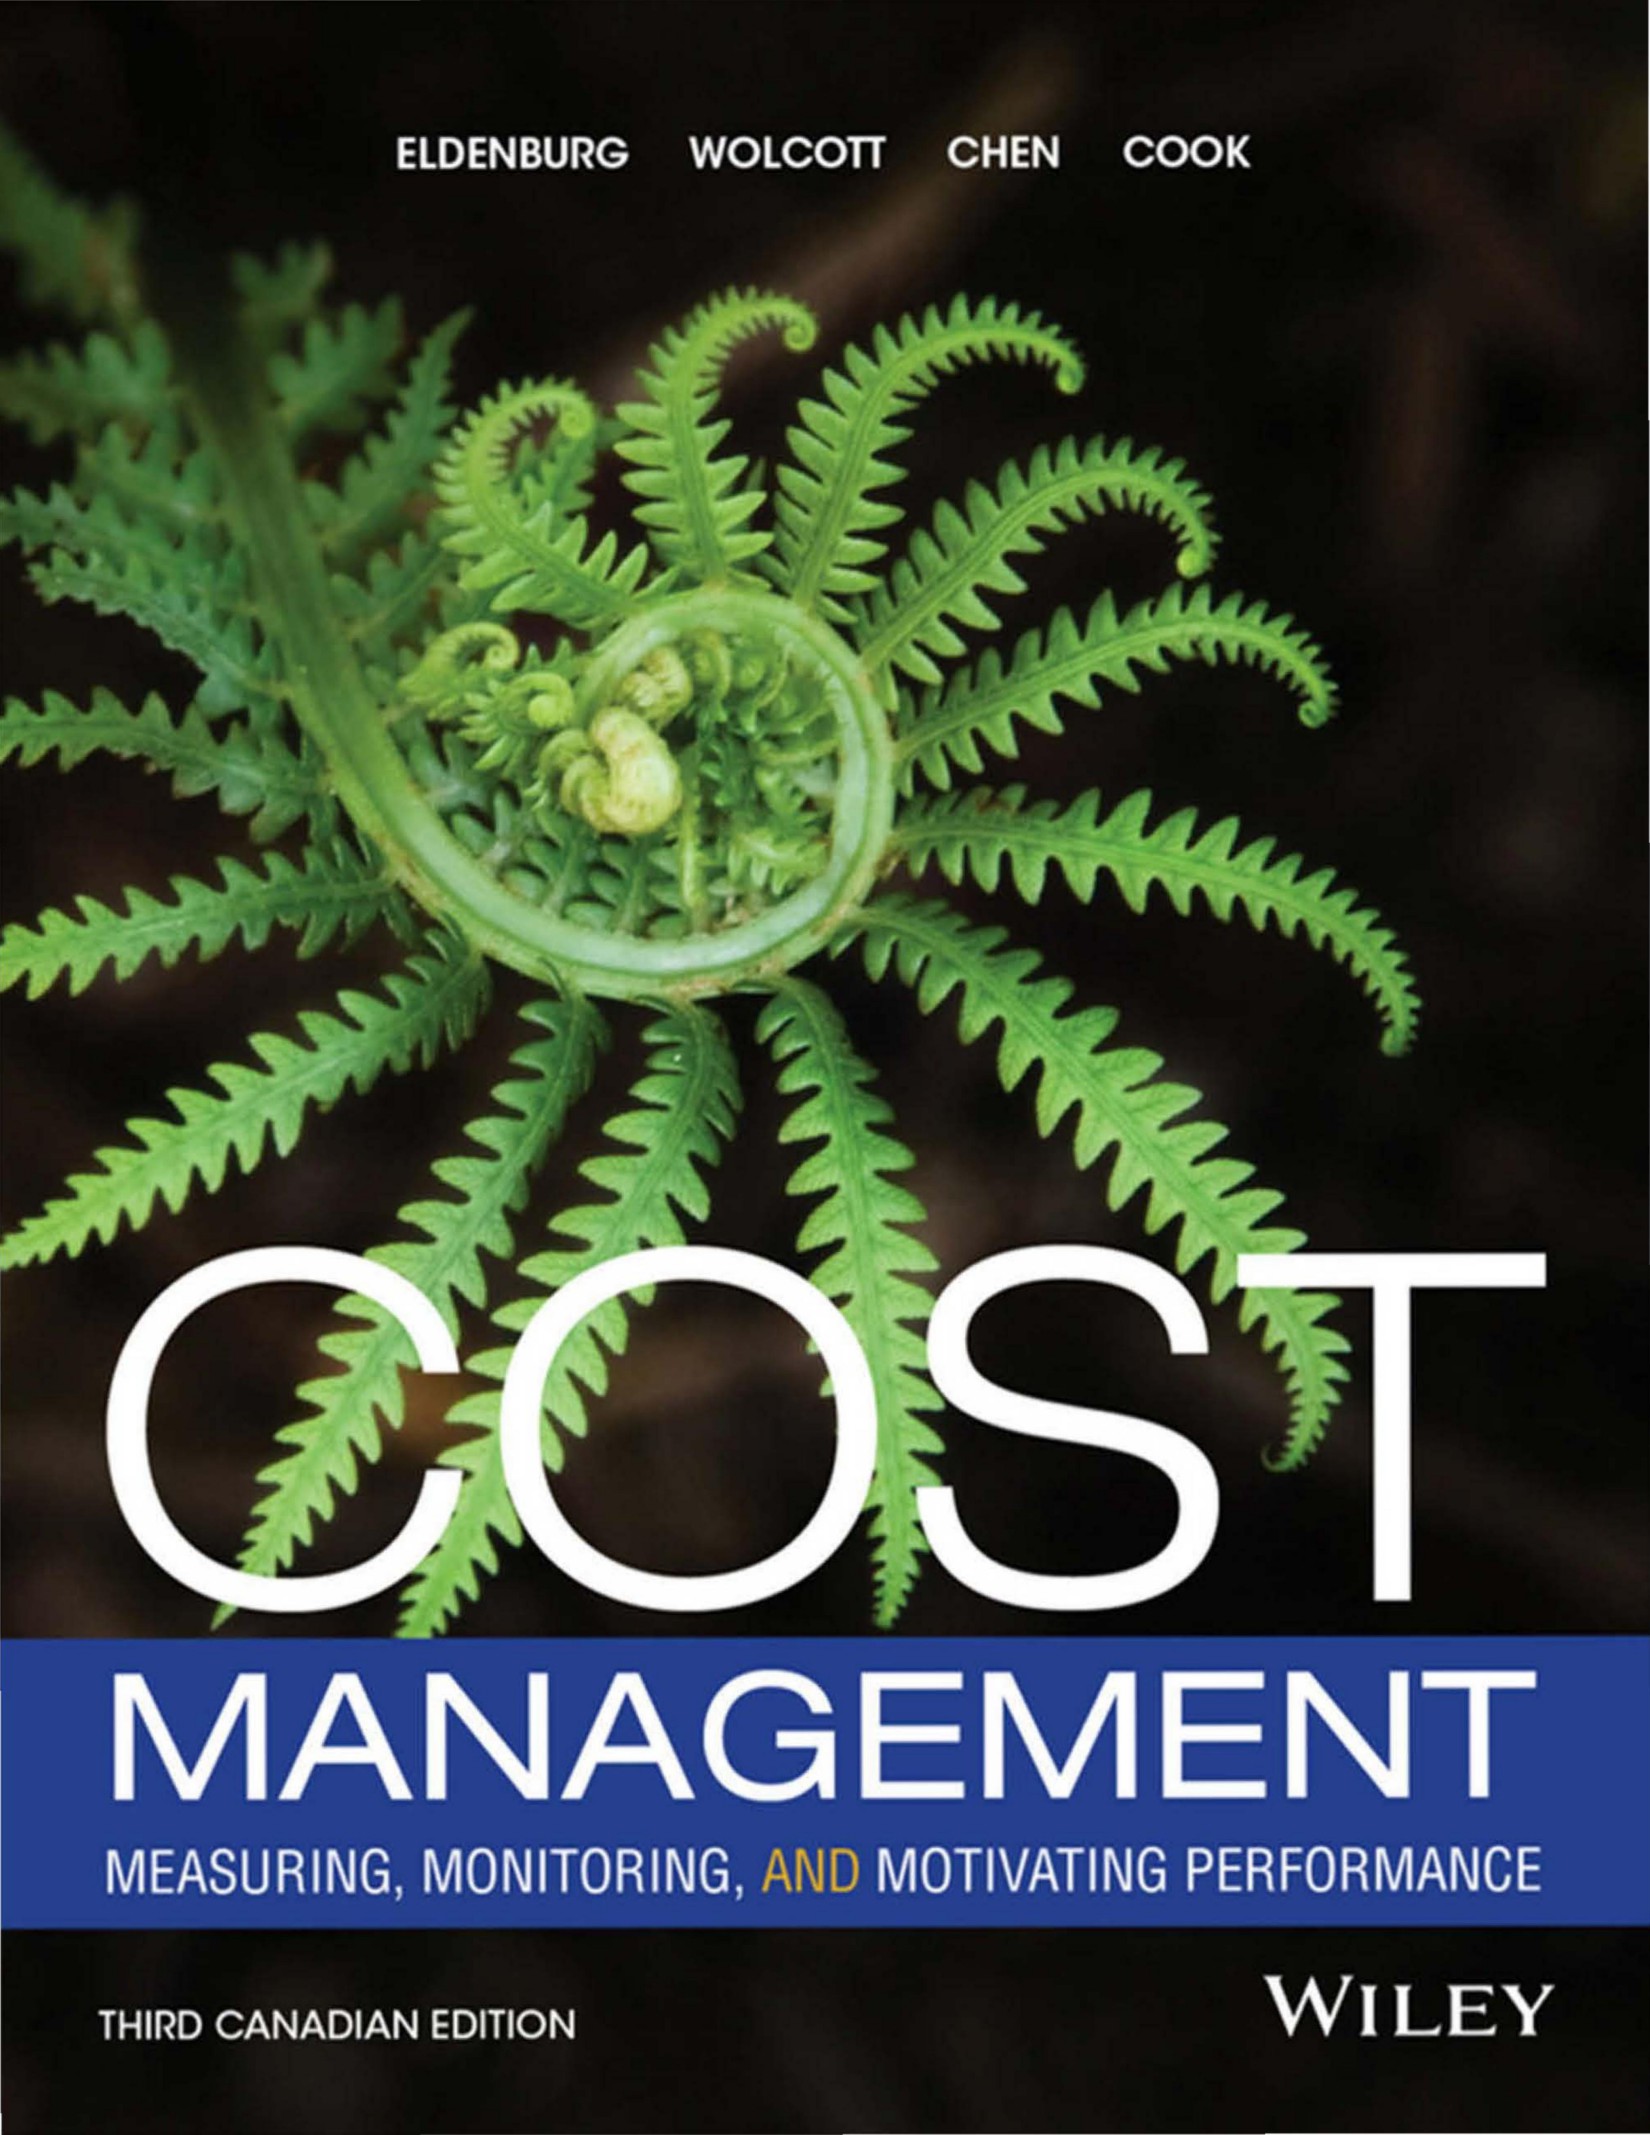 Cost Management Measuring, Monitoring, and Motivating Performance, 3rd Canadian Edition.jpg